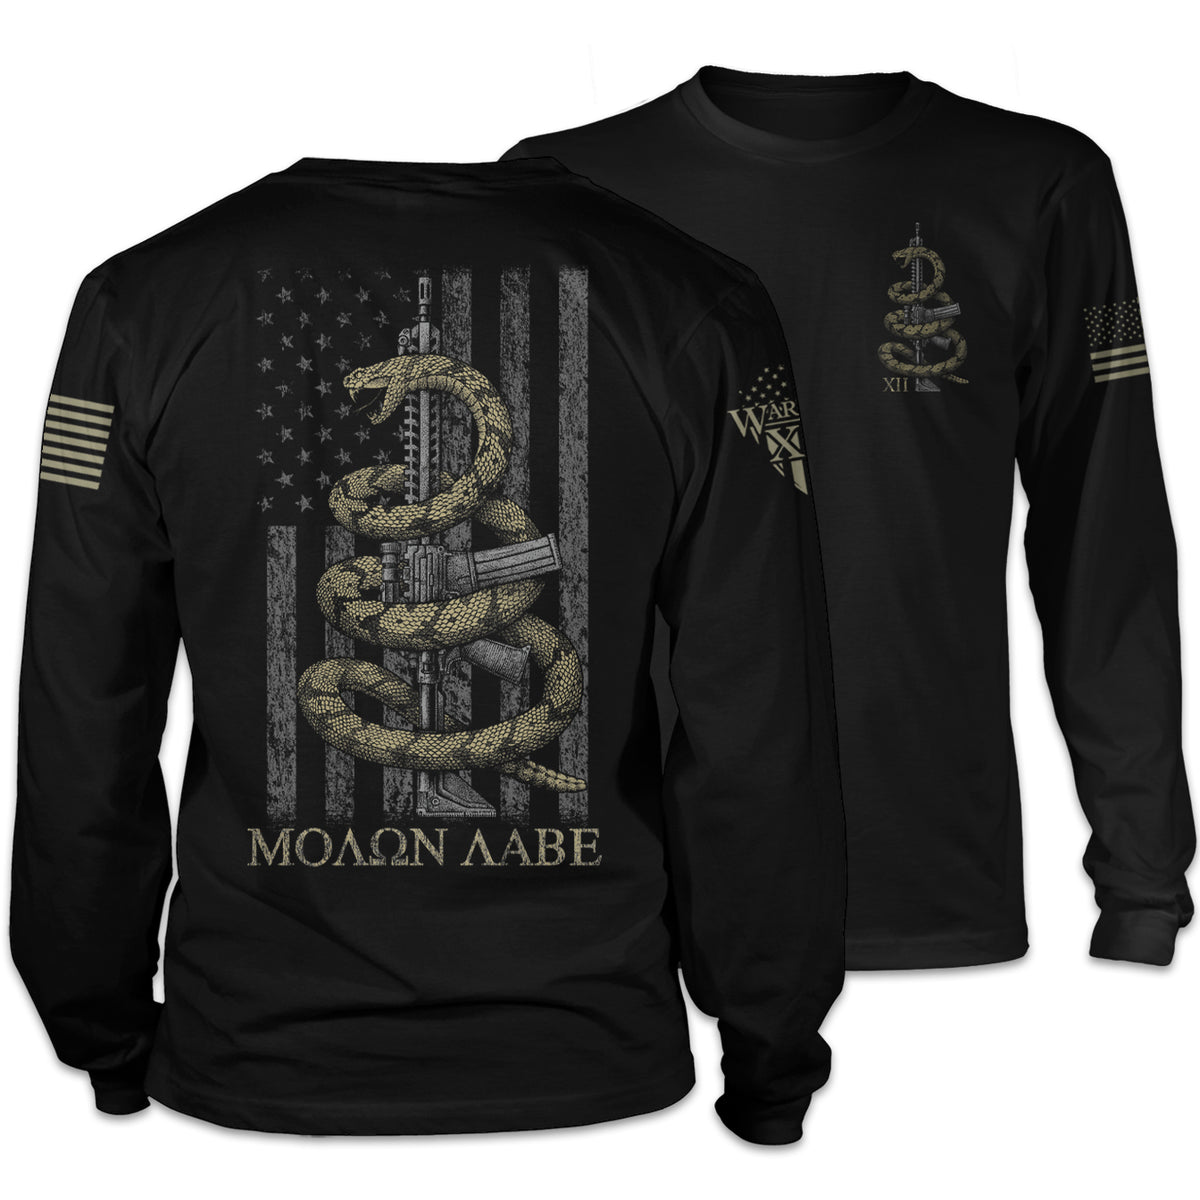 Front & back black long sleeve shirt with the words 'Molon Labe,' meaning "Come and Take," and a coiled rattlesnake ready to defend an AR-15 printed on the shirt.